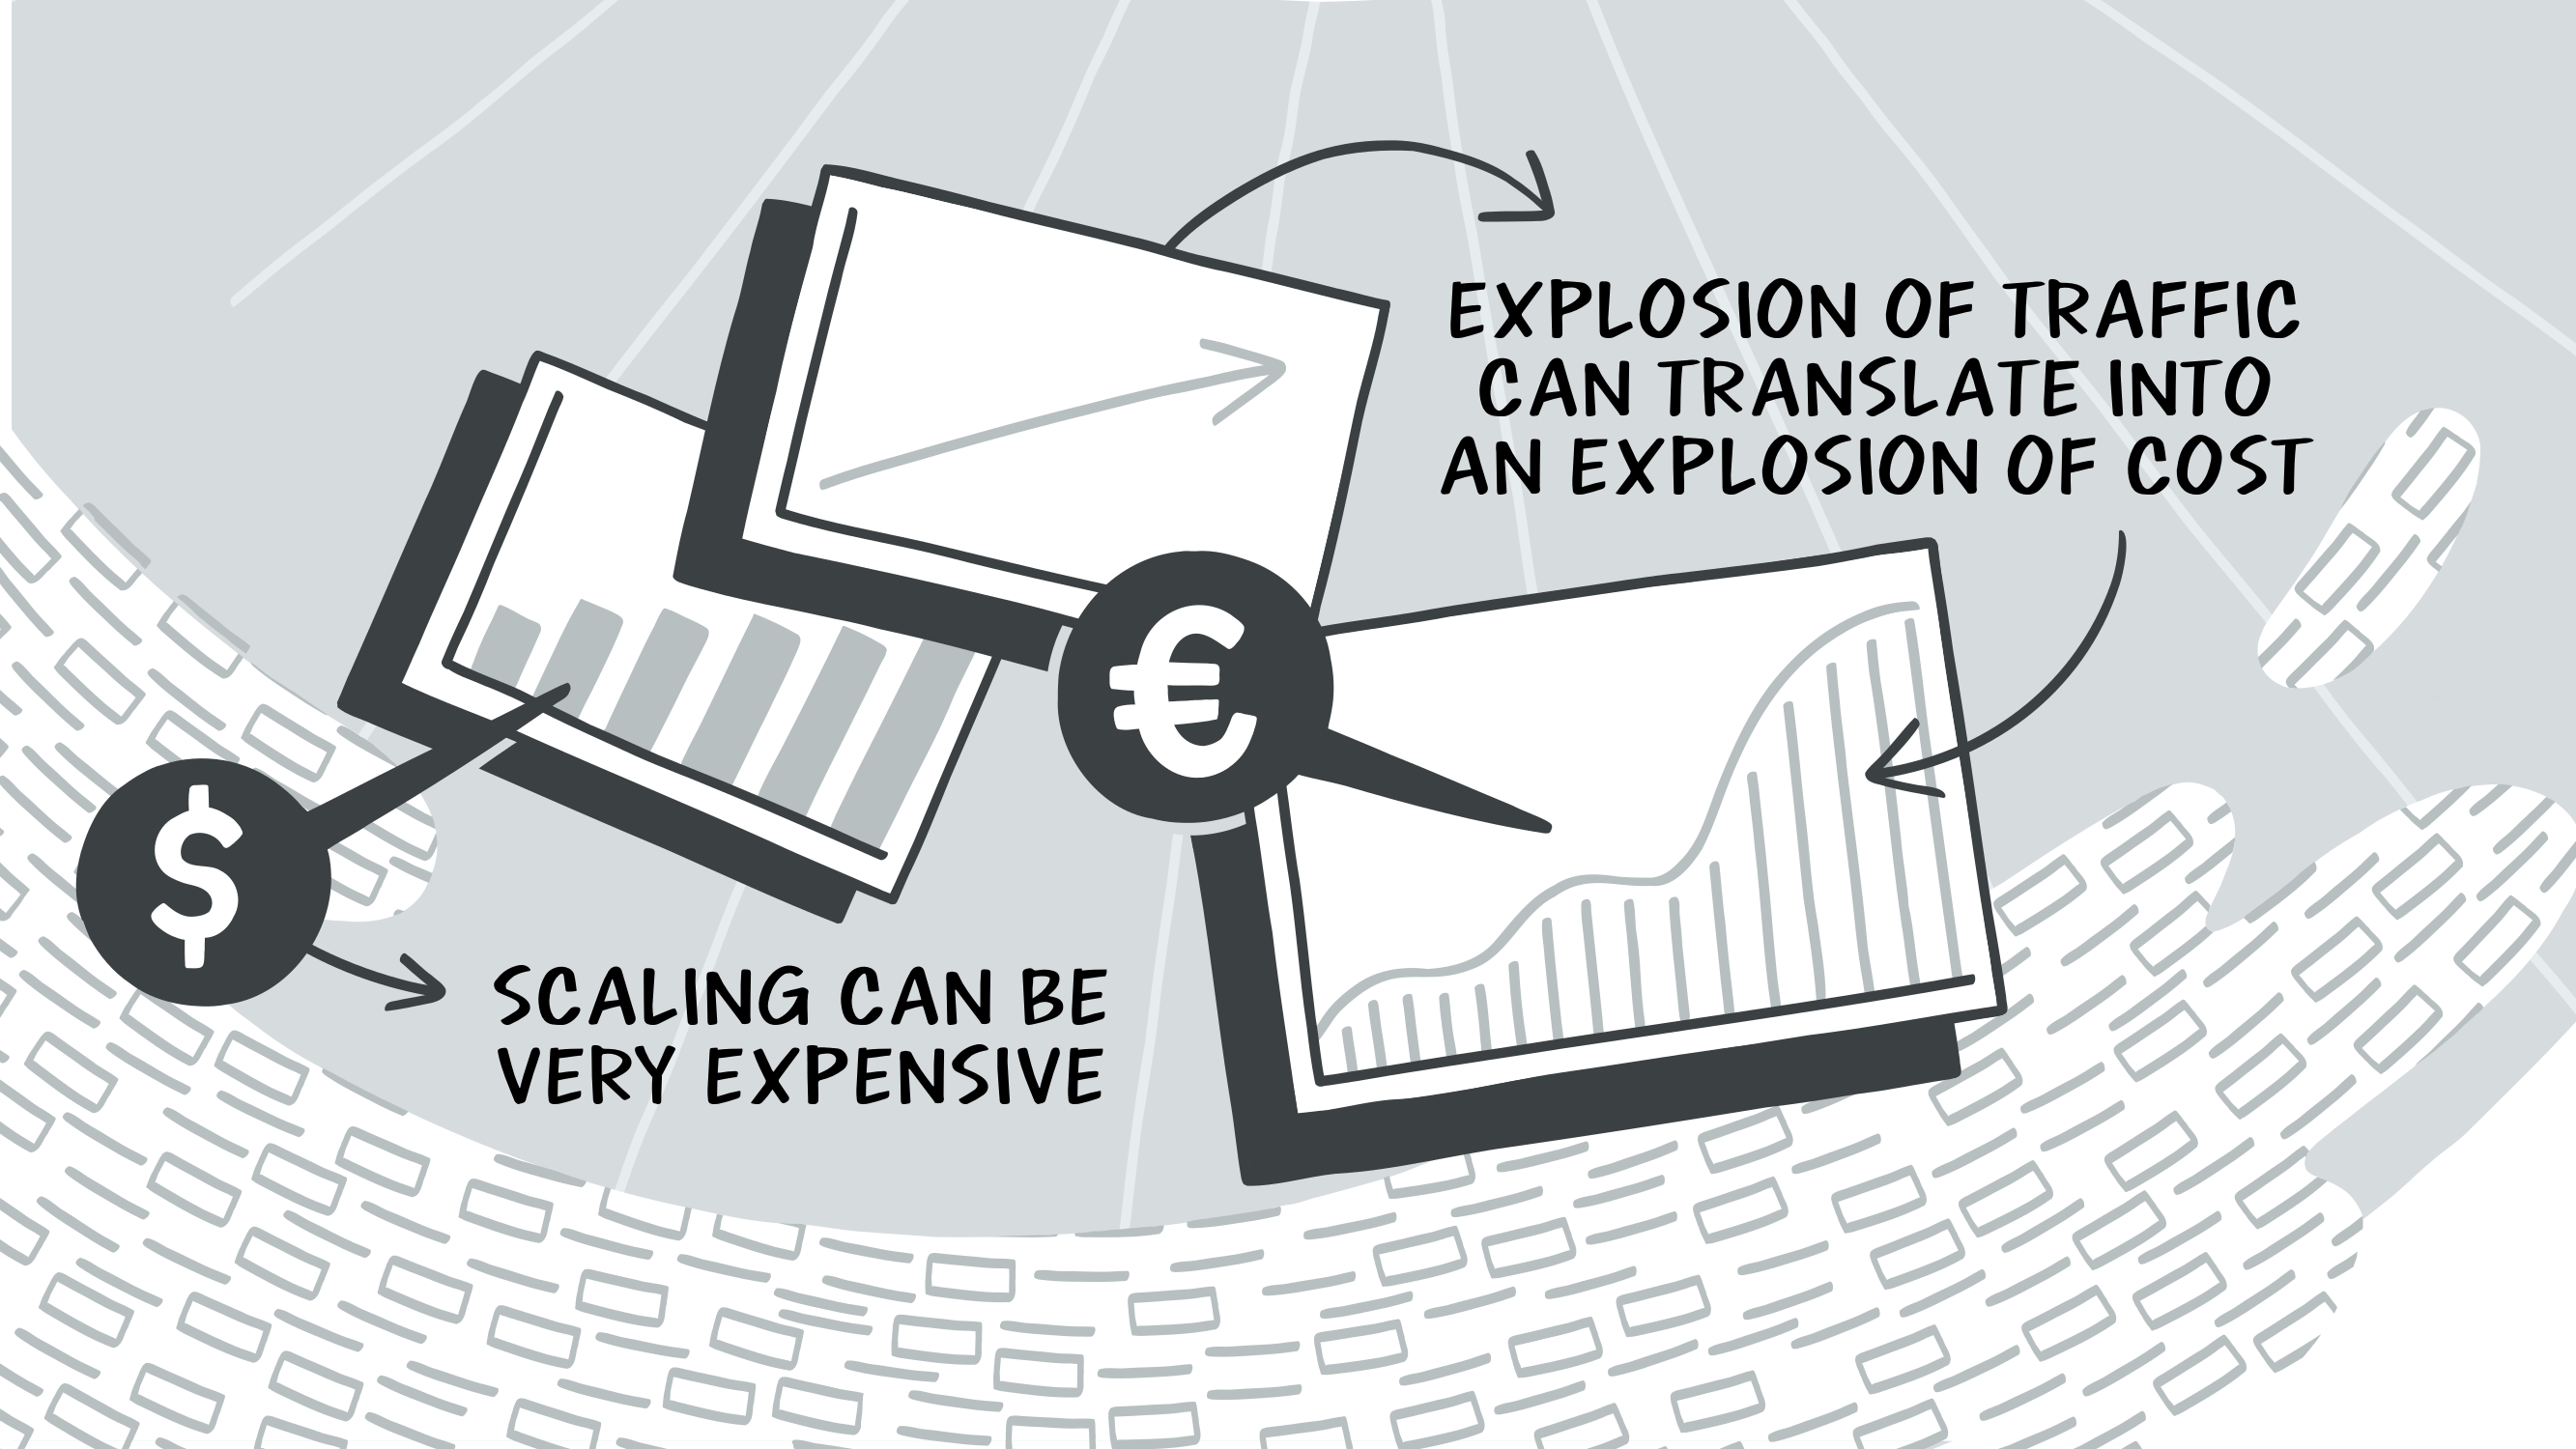 Scaling can be very expensive - an explosion of traffic can translate into an explosion of cost